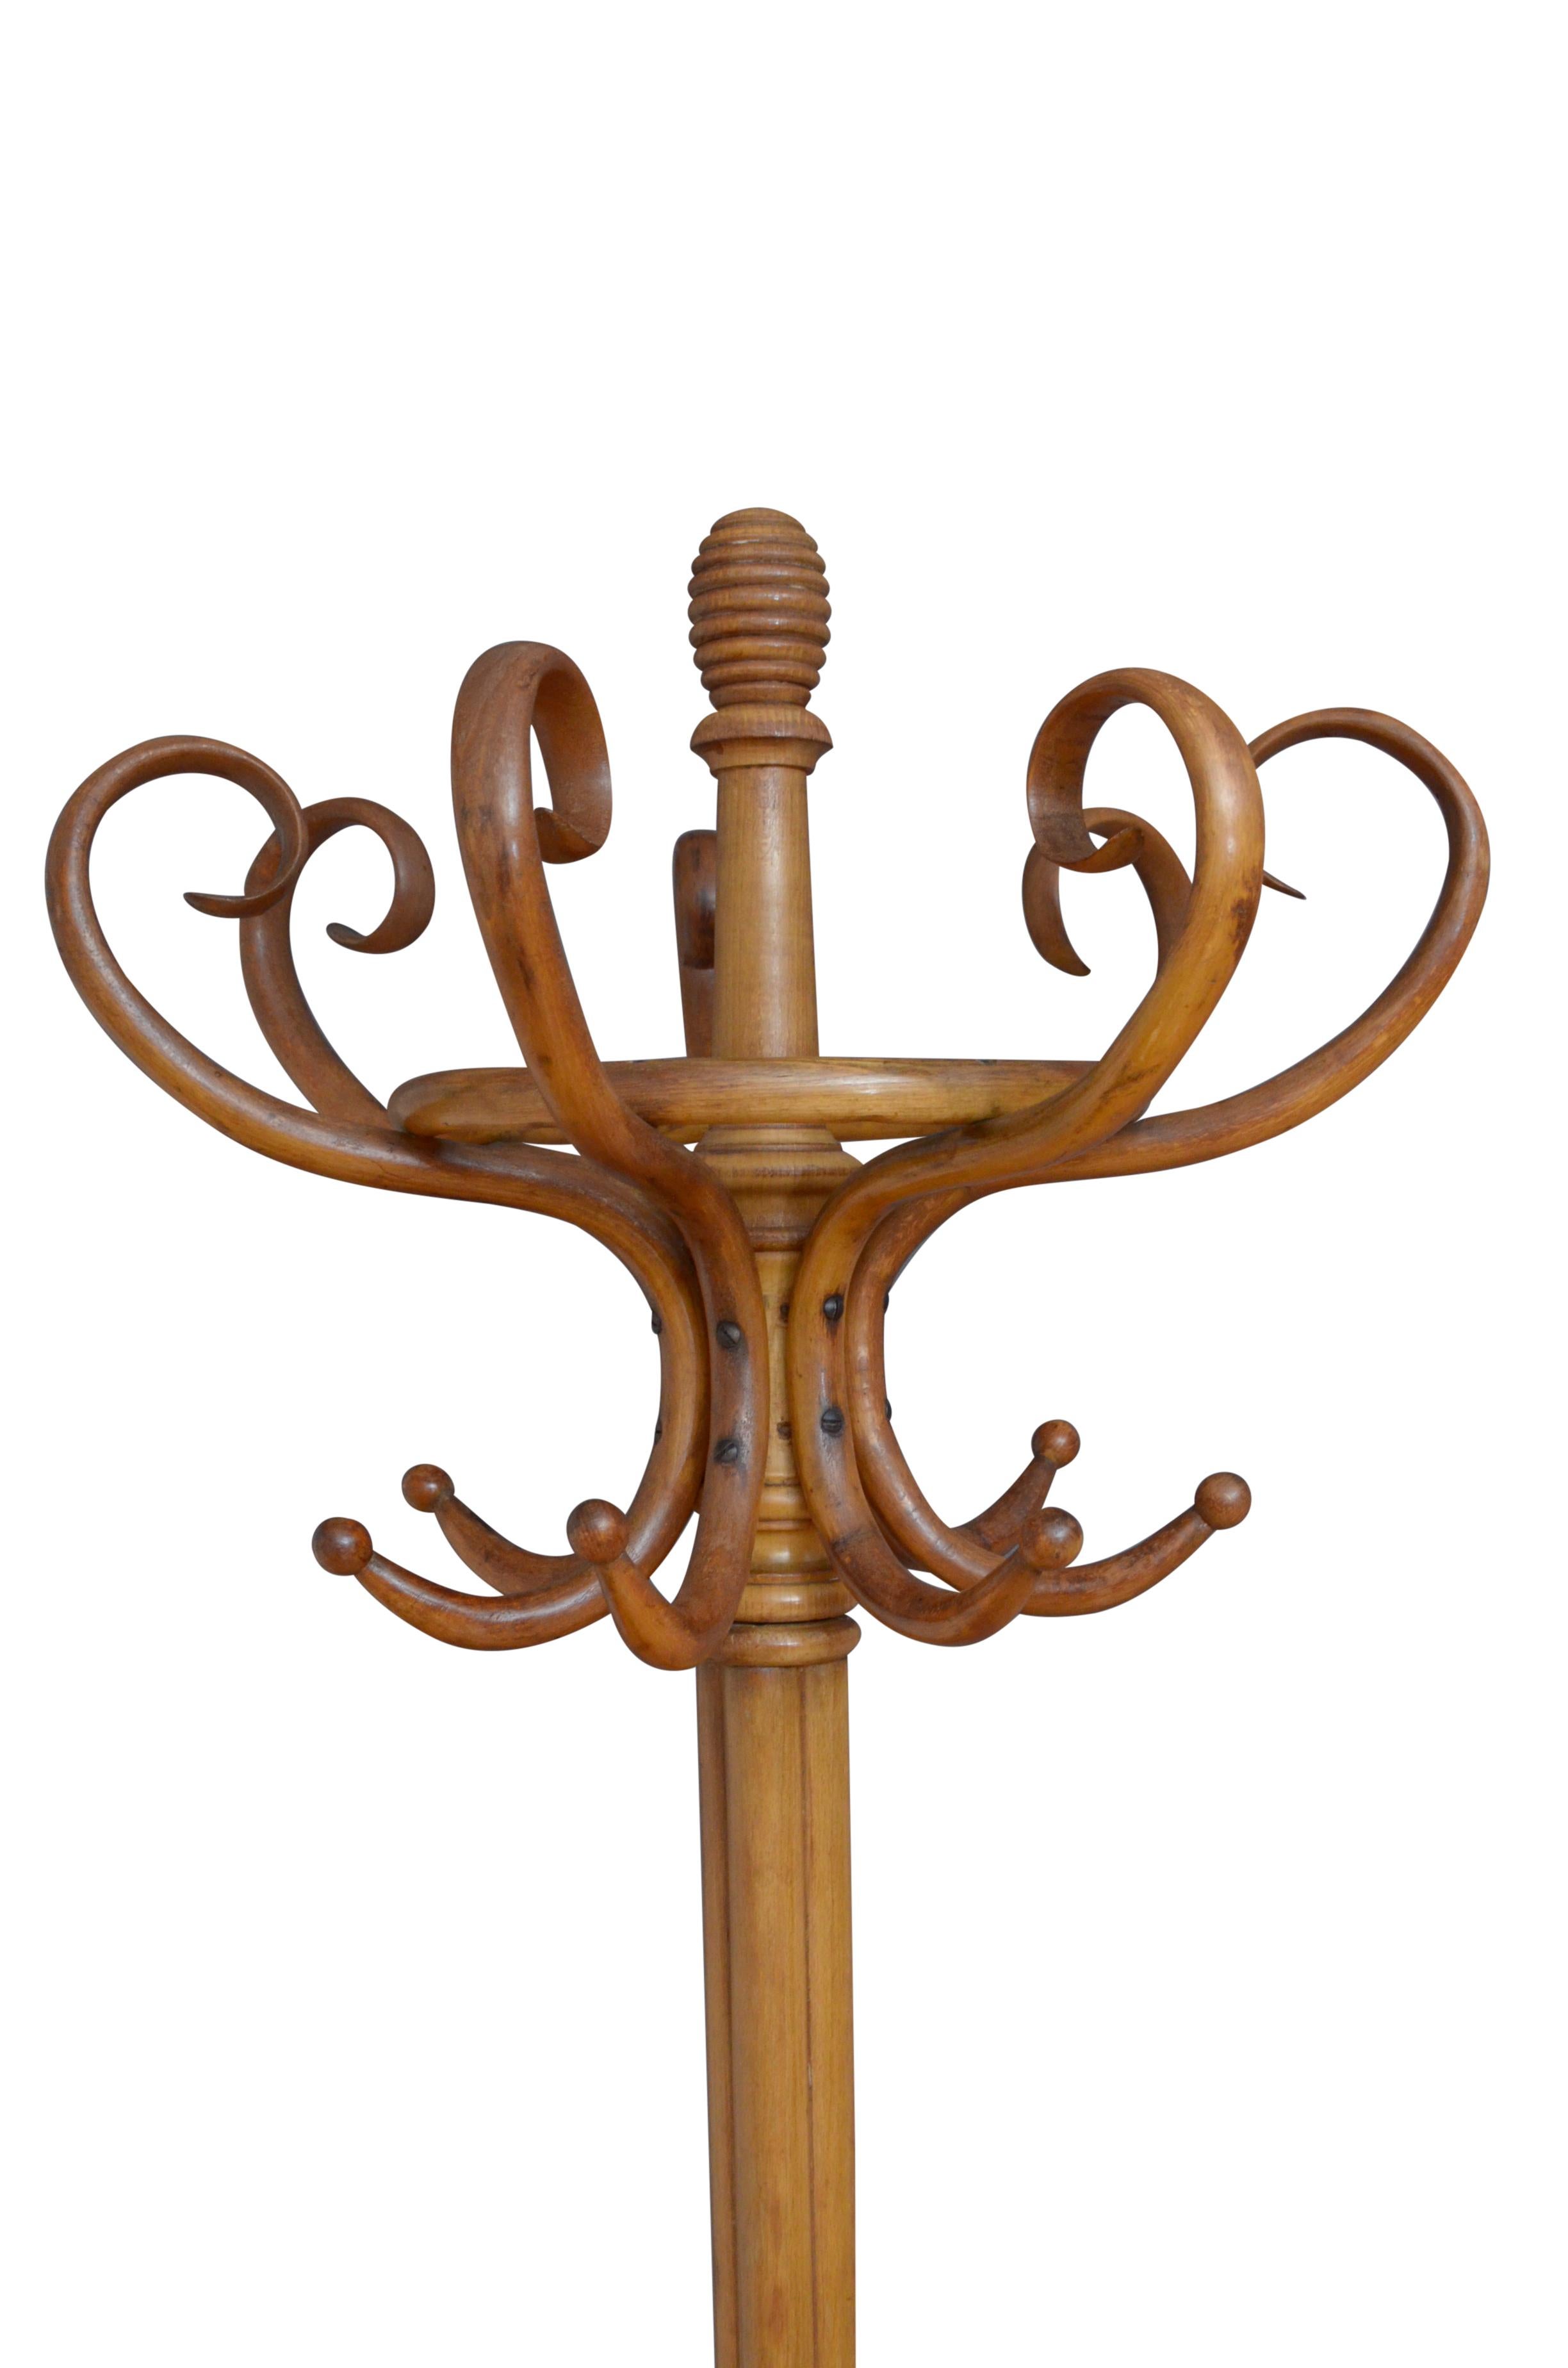 Superb early XXth century bentwood hall stand in light wood, having 8 S shaped coat hooks and 8 bentwood scrolls for hats, surmounted by a turned finial, supported on cluster column terminating in 4 downswept legs with a ring for sticks and